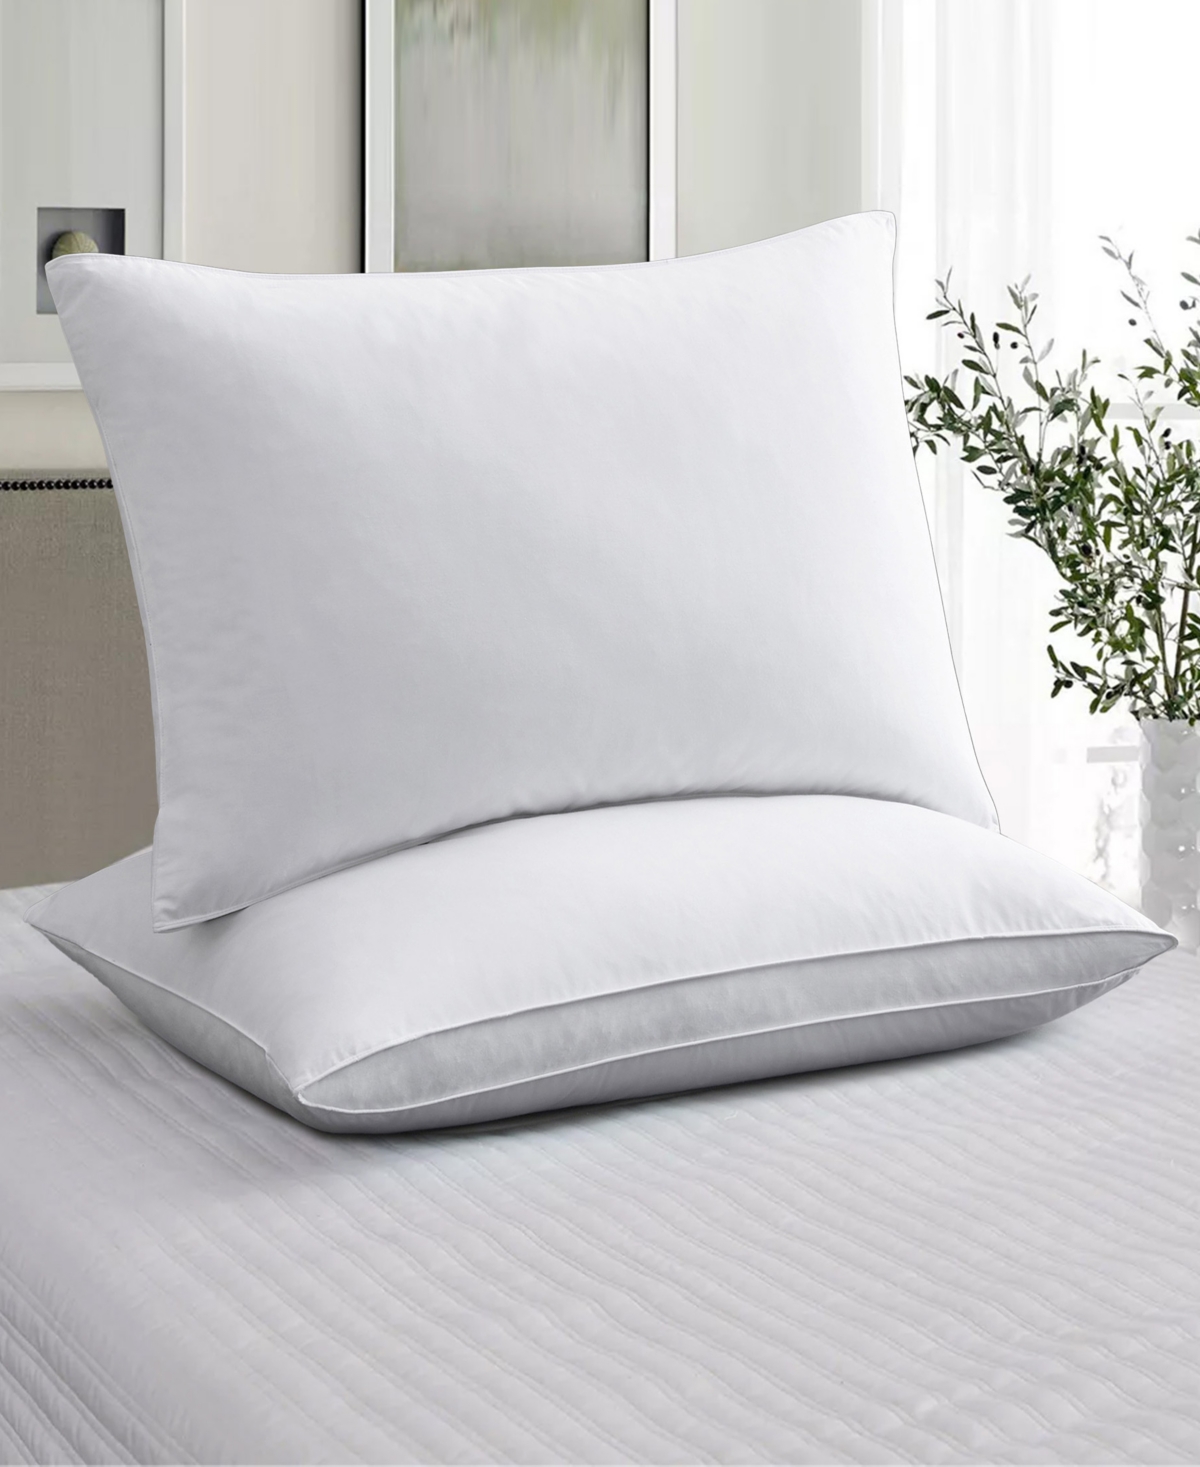 Unikome 2 Pack 100% Cotton Medium Soft Down And Feather Gusseted Bed Pillow Set, Queen In White